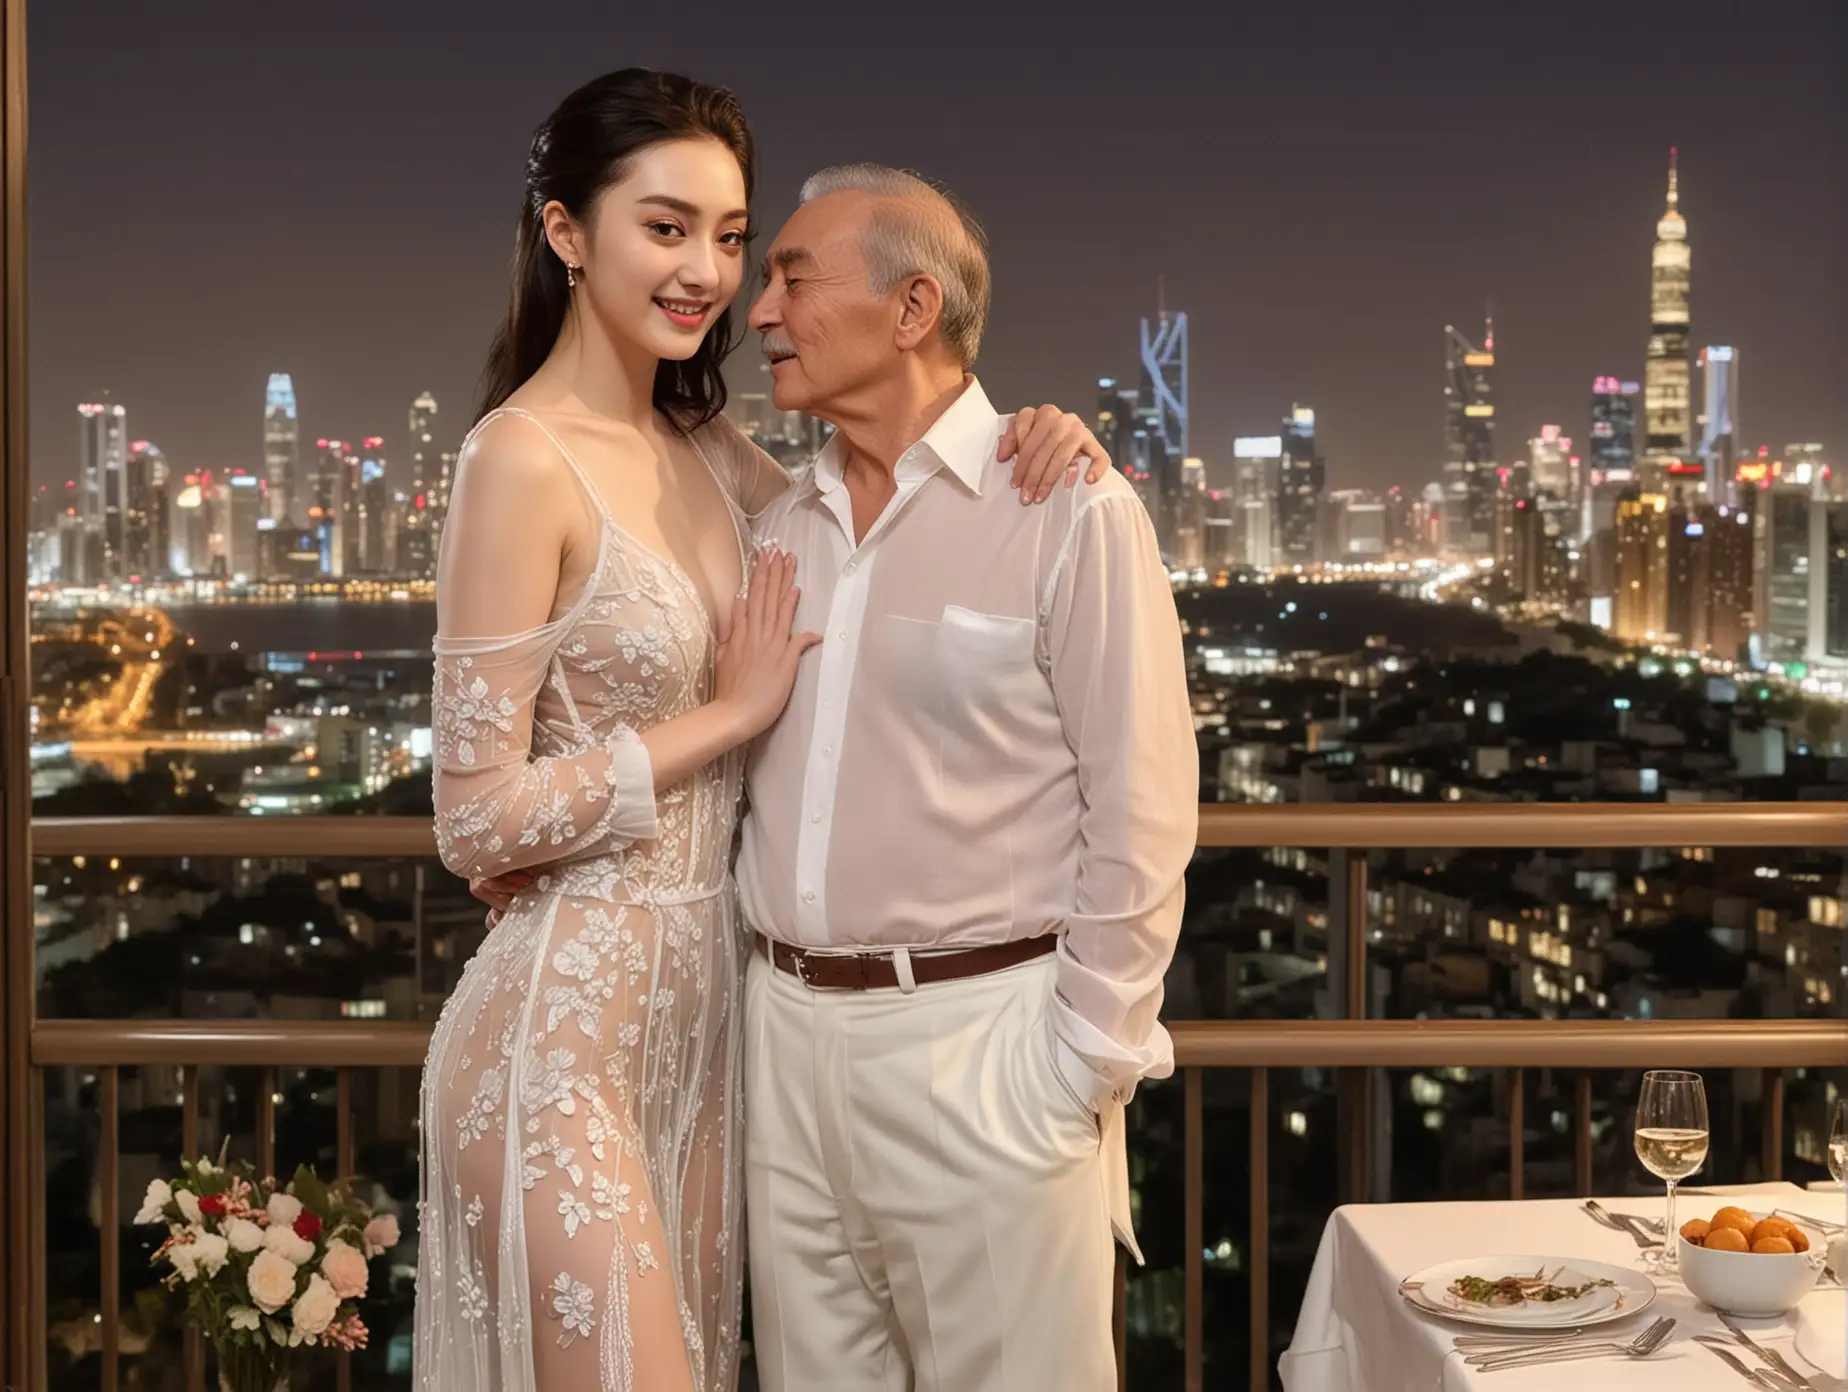 Romantic Dinner Date Jing Tian in See Through Gown Embraced by Older Man